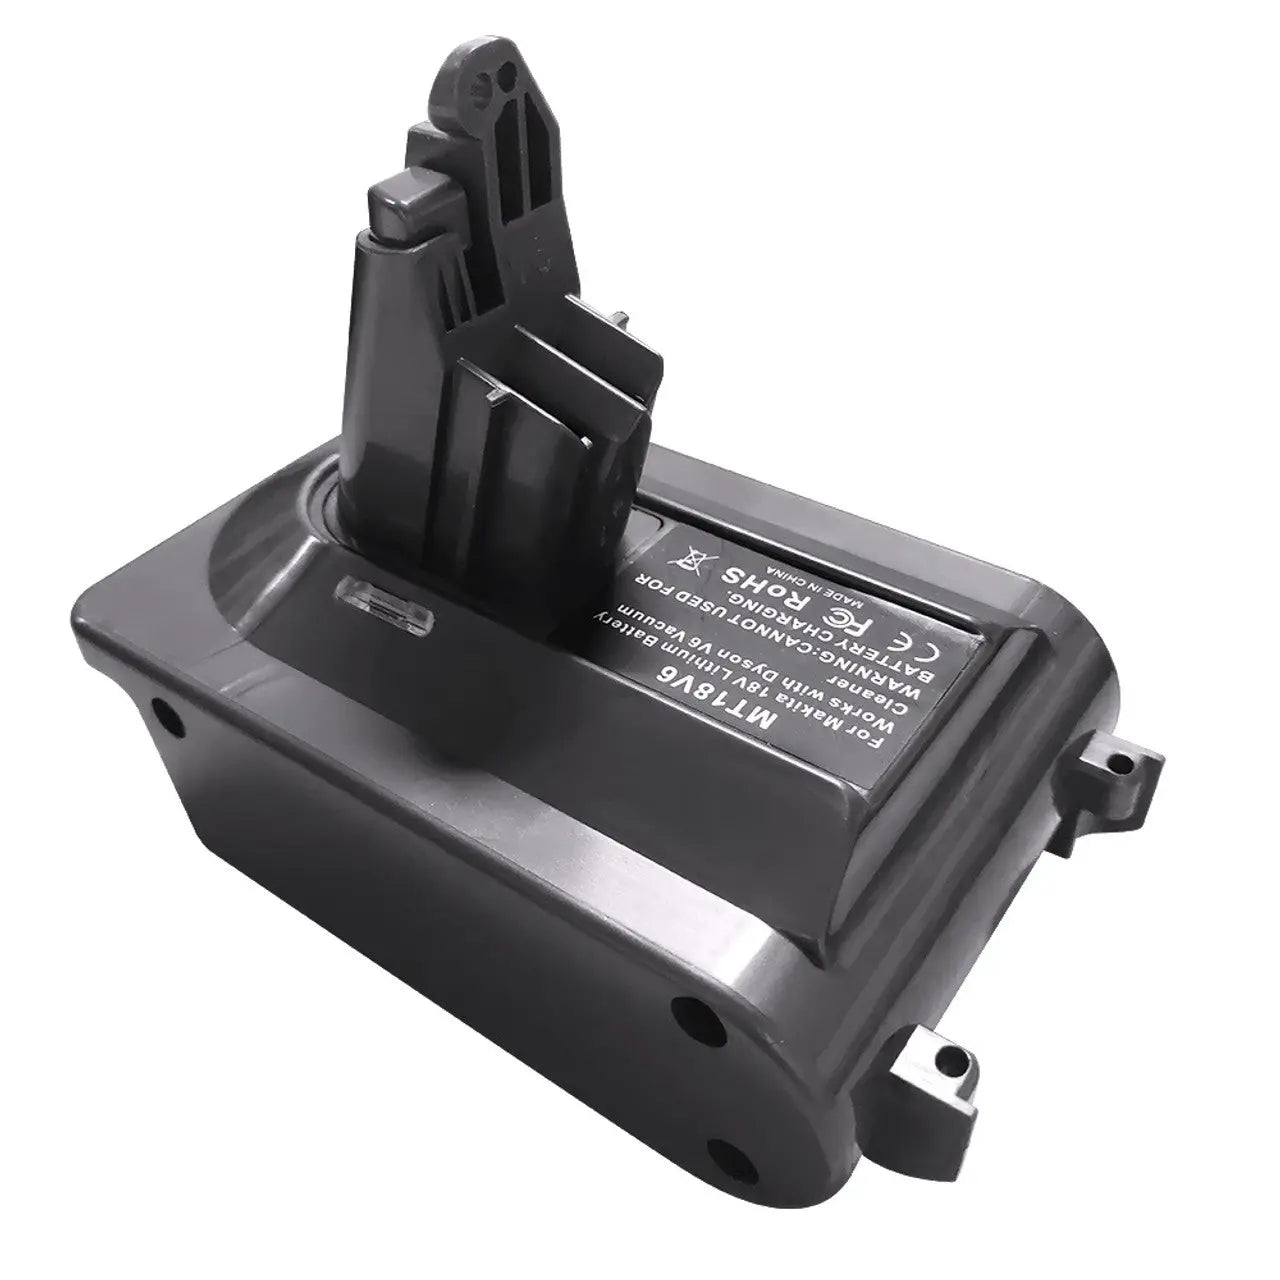 Makita 18V To Dyson V6, DC58 & DC59 Battery Converter / Adapter from Deals499 at Deals499